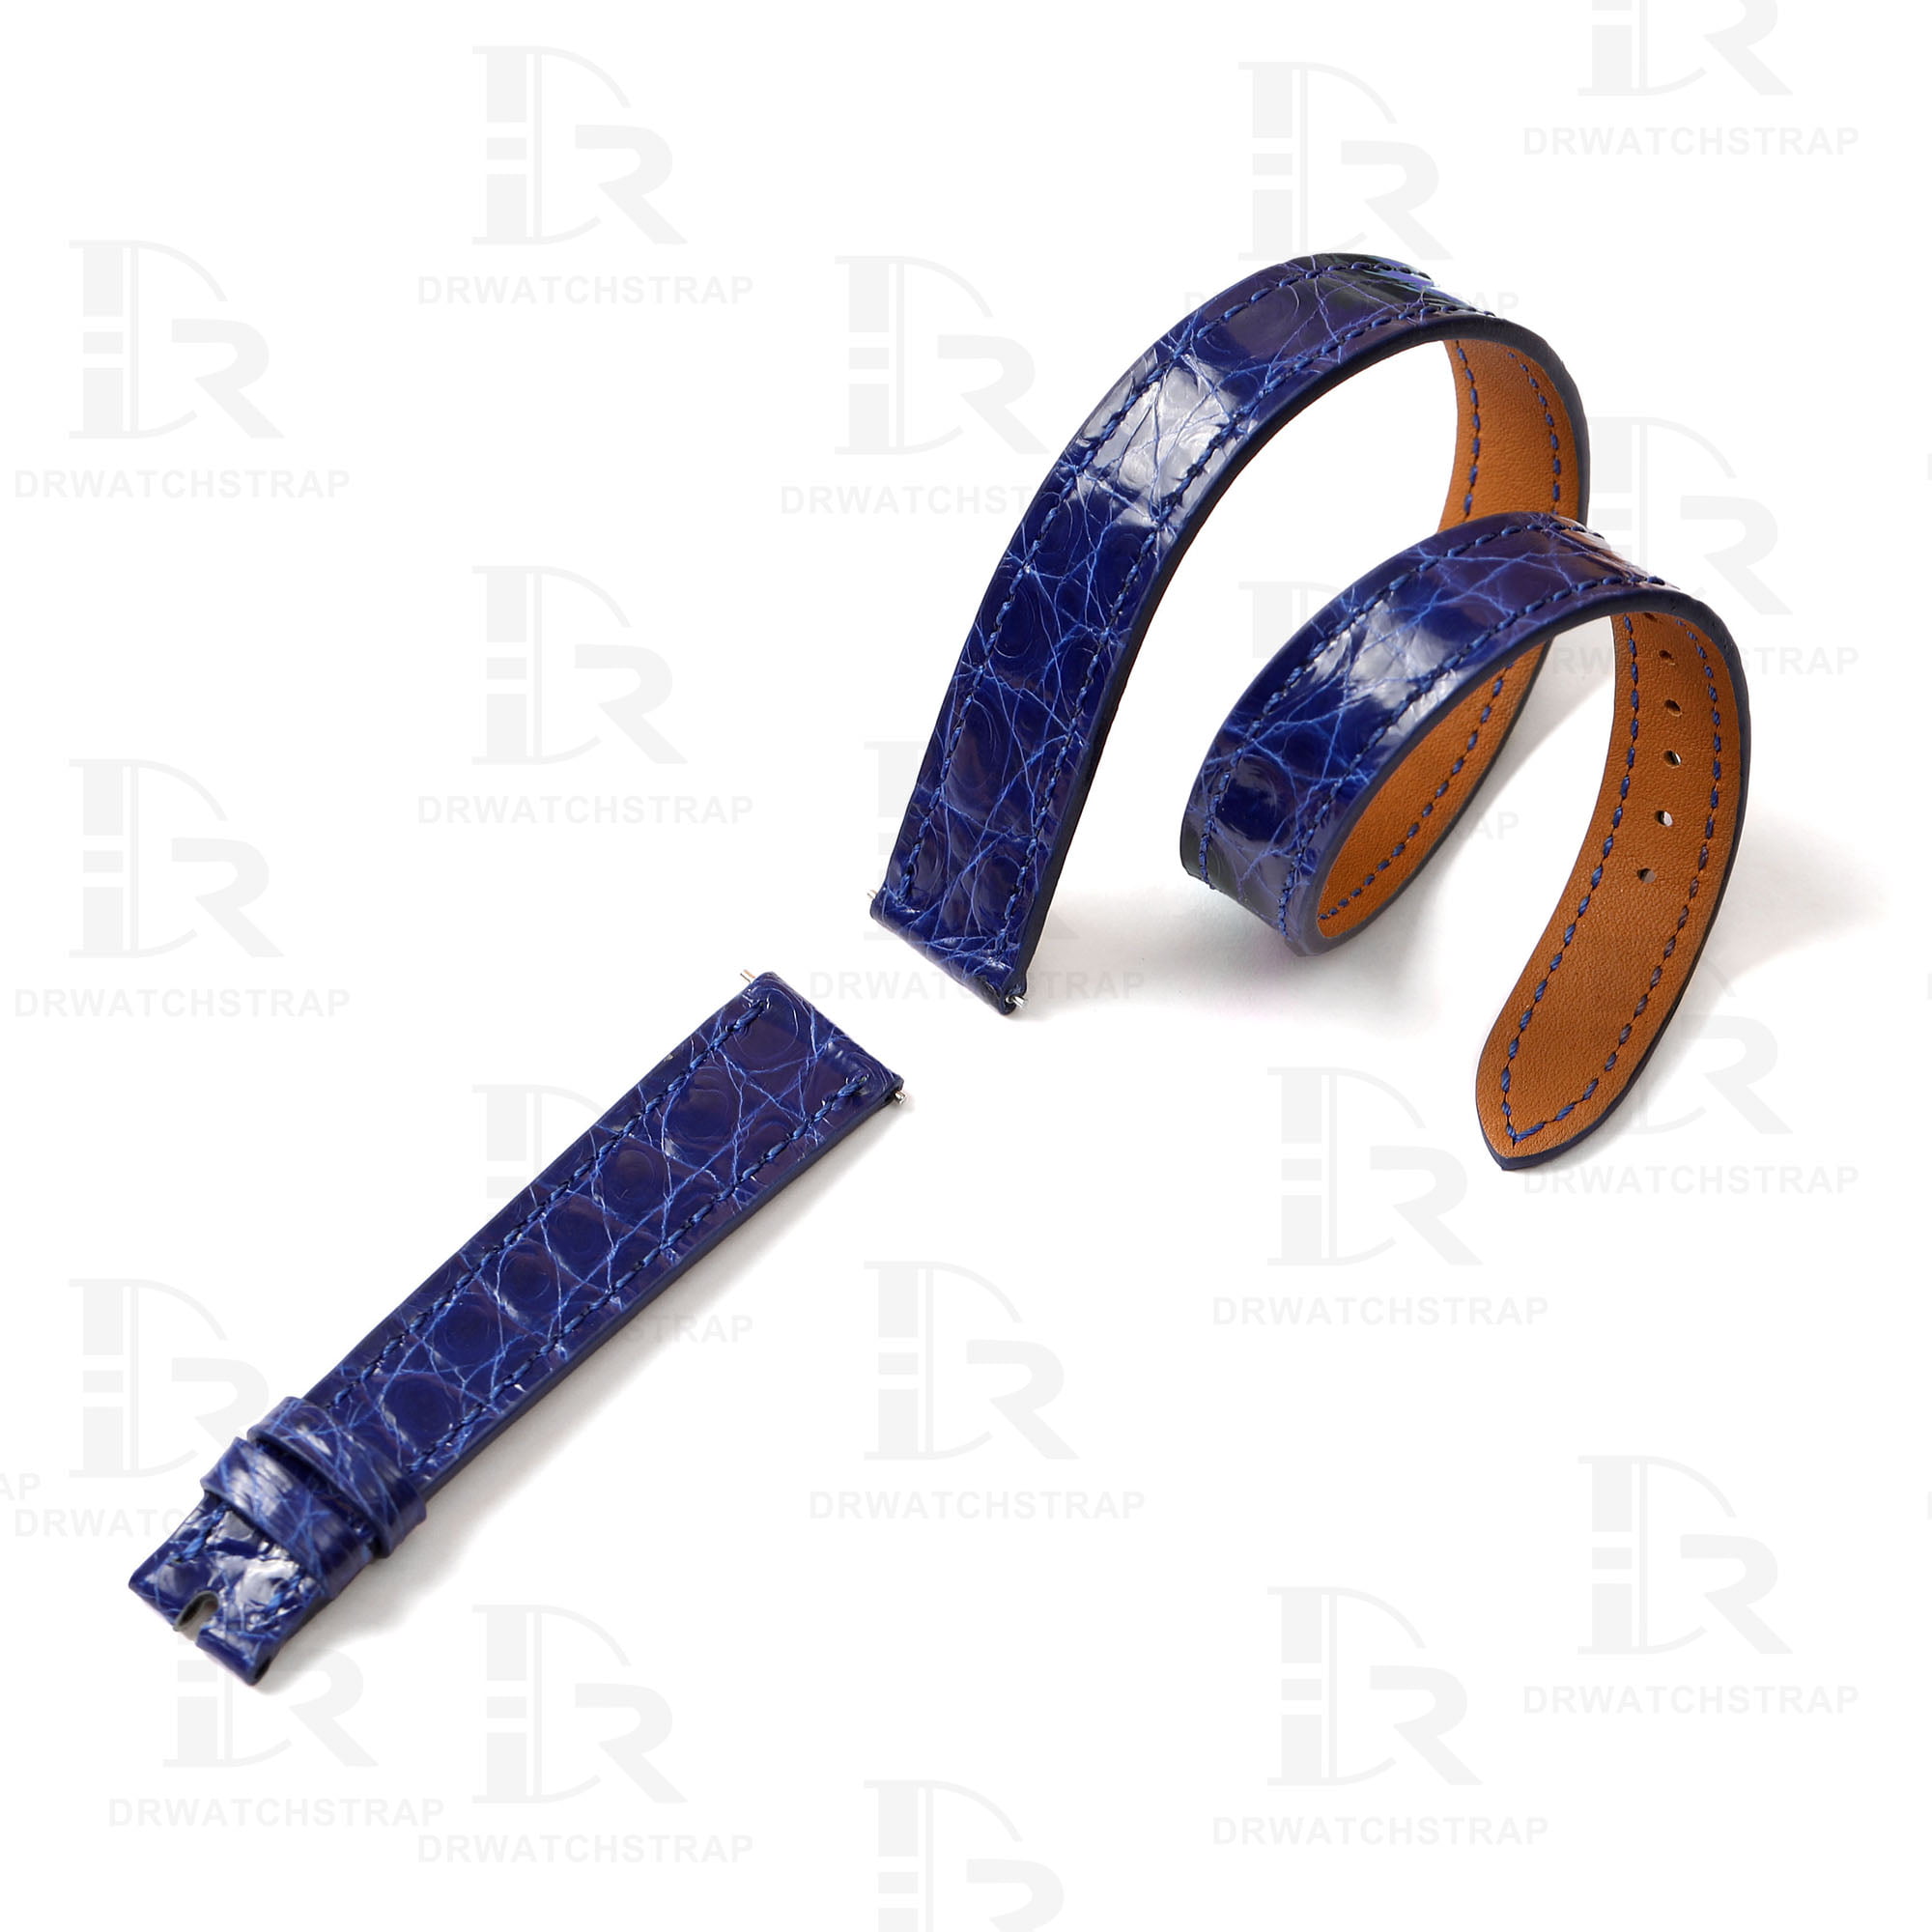 Custom blue alligator leather watch strap replacement for Hermes Cape cod, Heure H, and Arceau